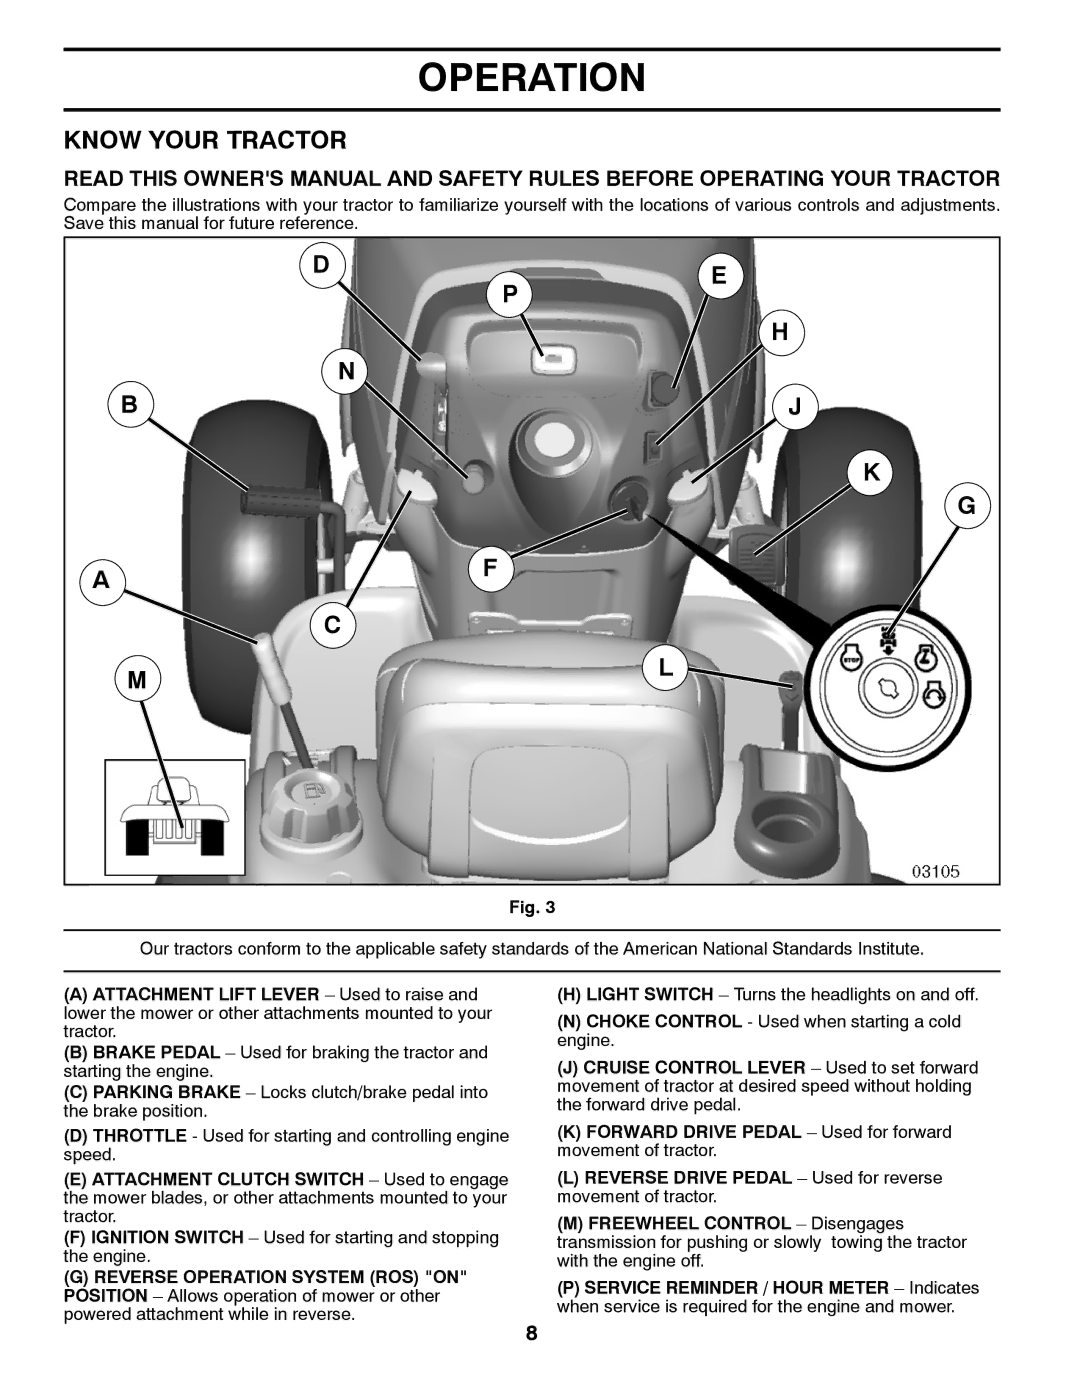 Jonsered LT2226 A2 manual Know Your Tractor 